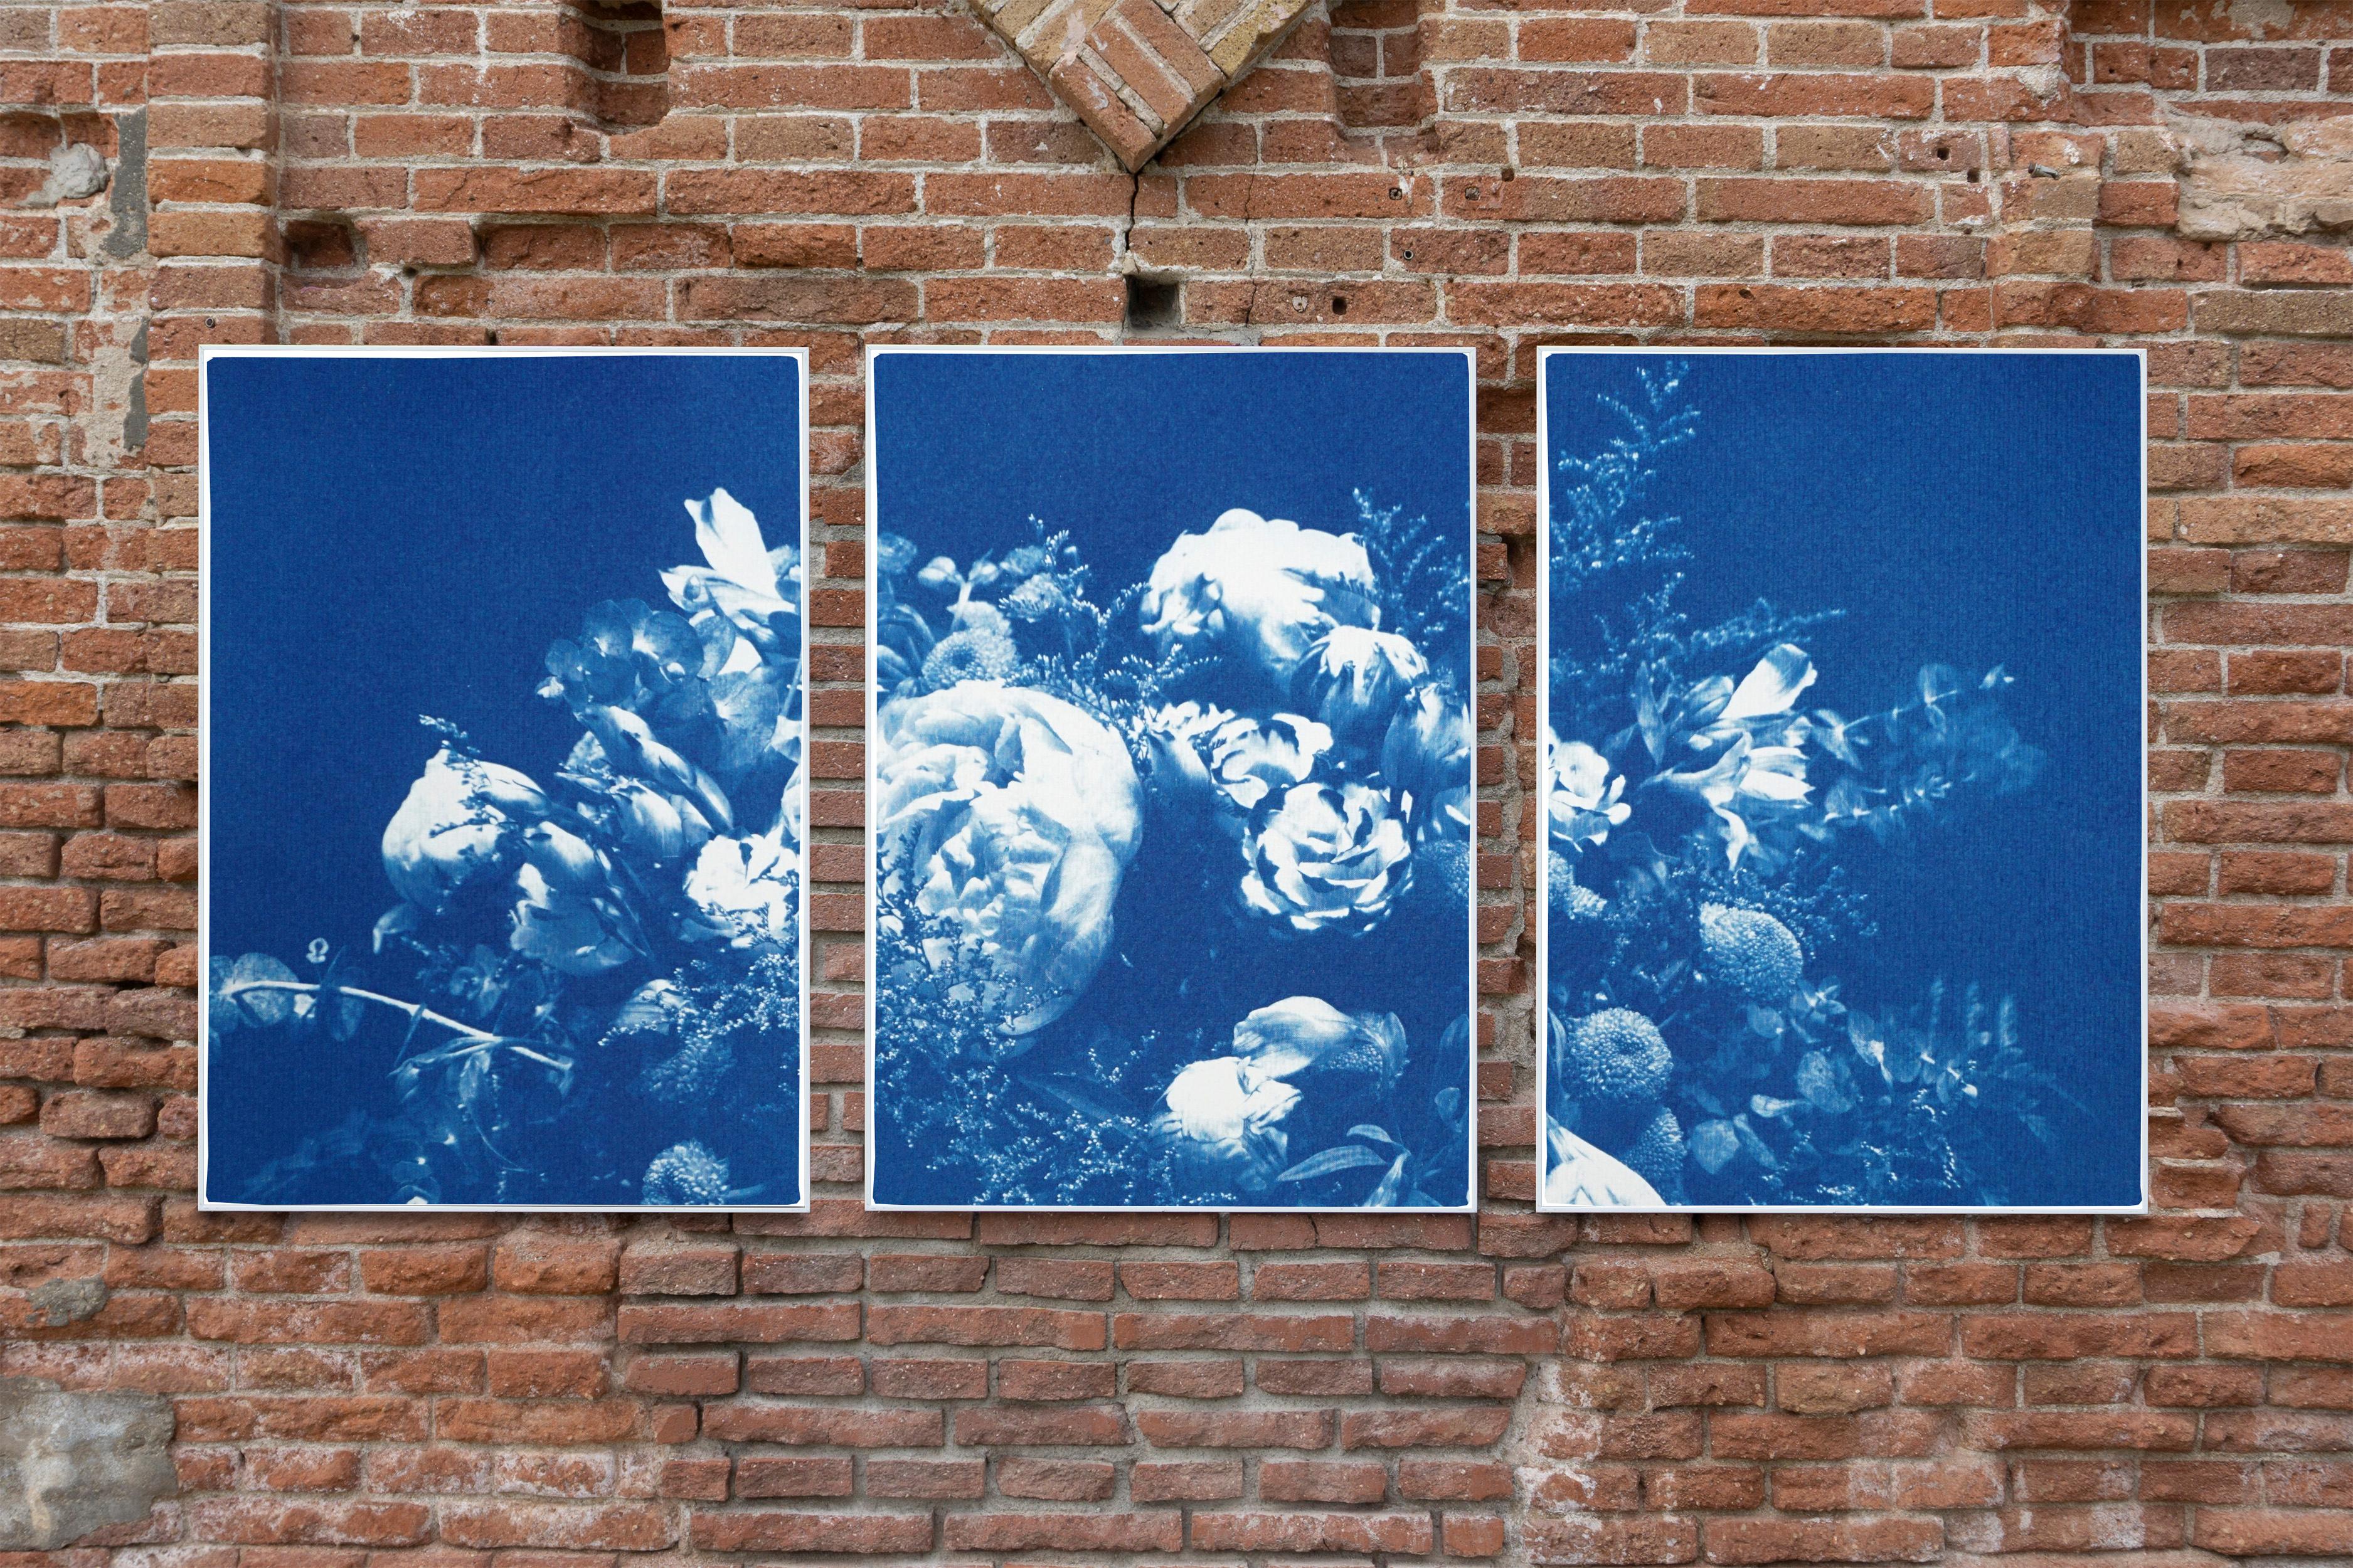 Floral Triptych of Large Floral Bouquet, Botanical Cyanotype in Classic Blue  5